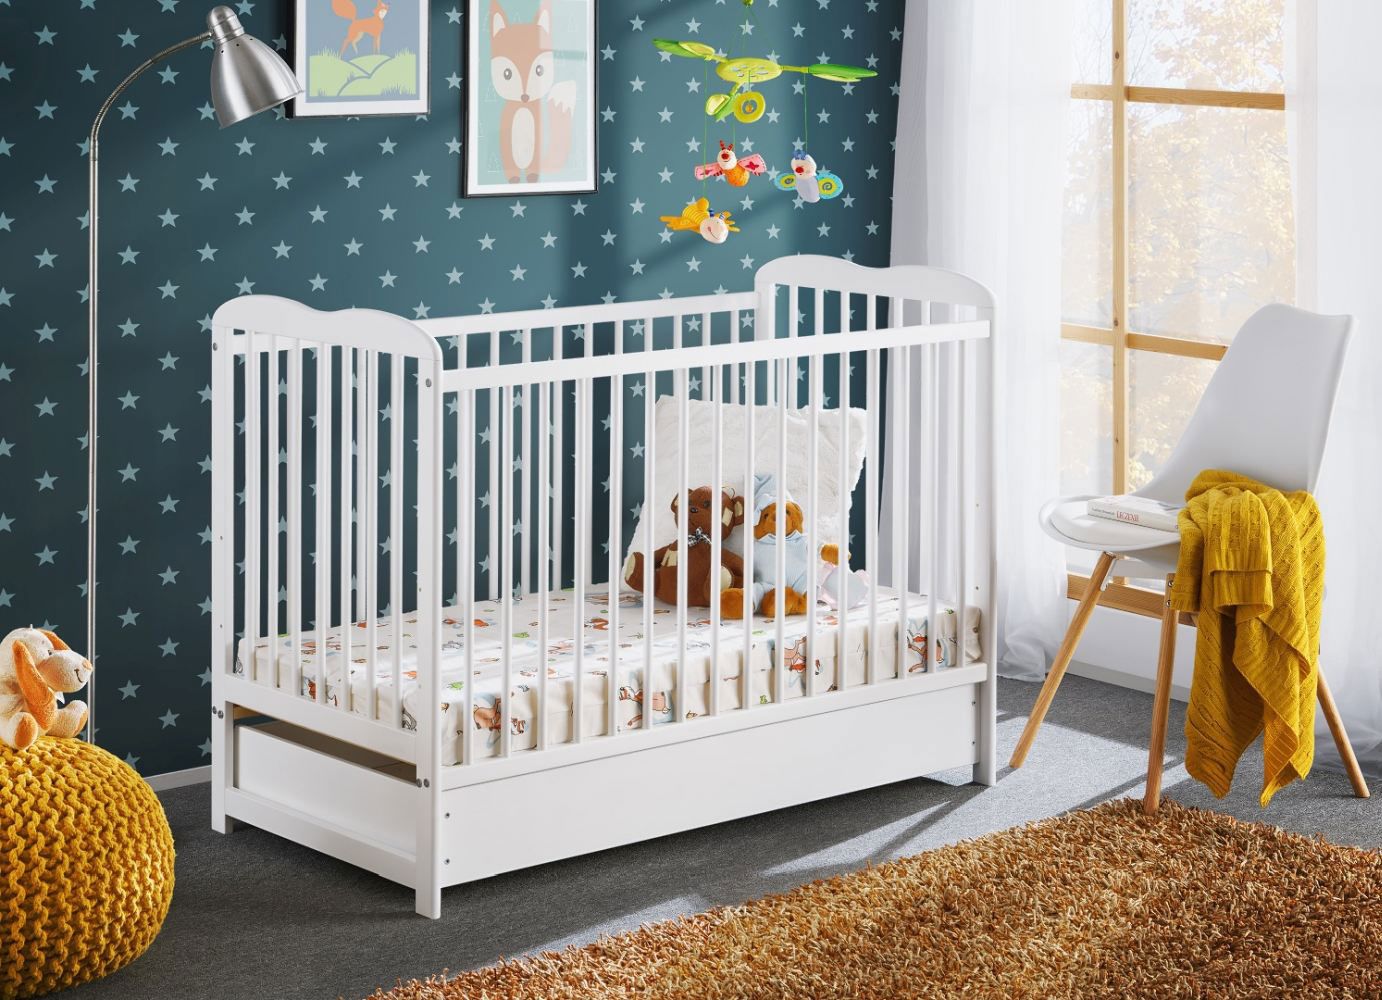 Children's bed / Baby bed real pine wood Avaldsnes 01, Colour